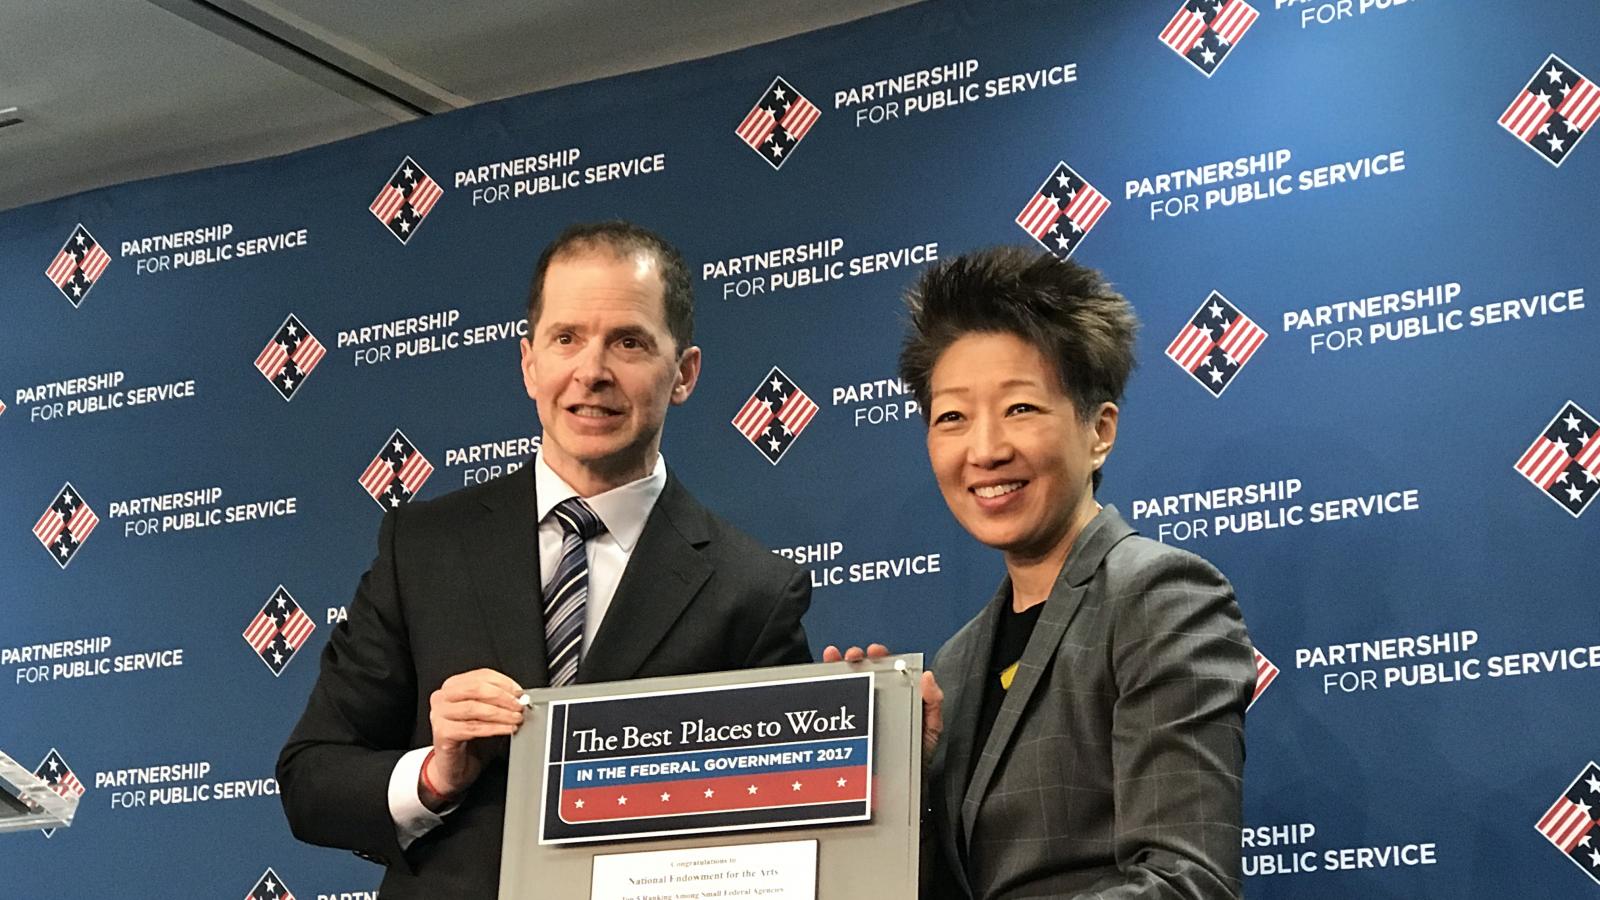 A man and a woman pose holding a plaque which says "The Best Places to Work in the Federal Government 2017"